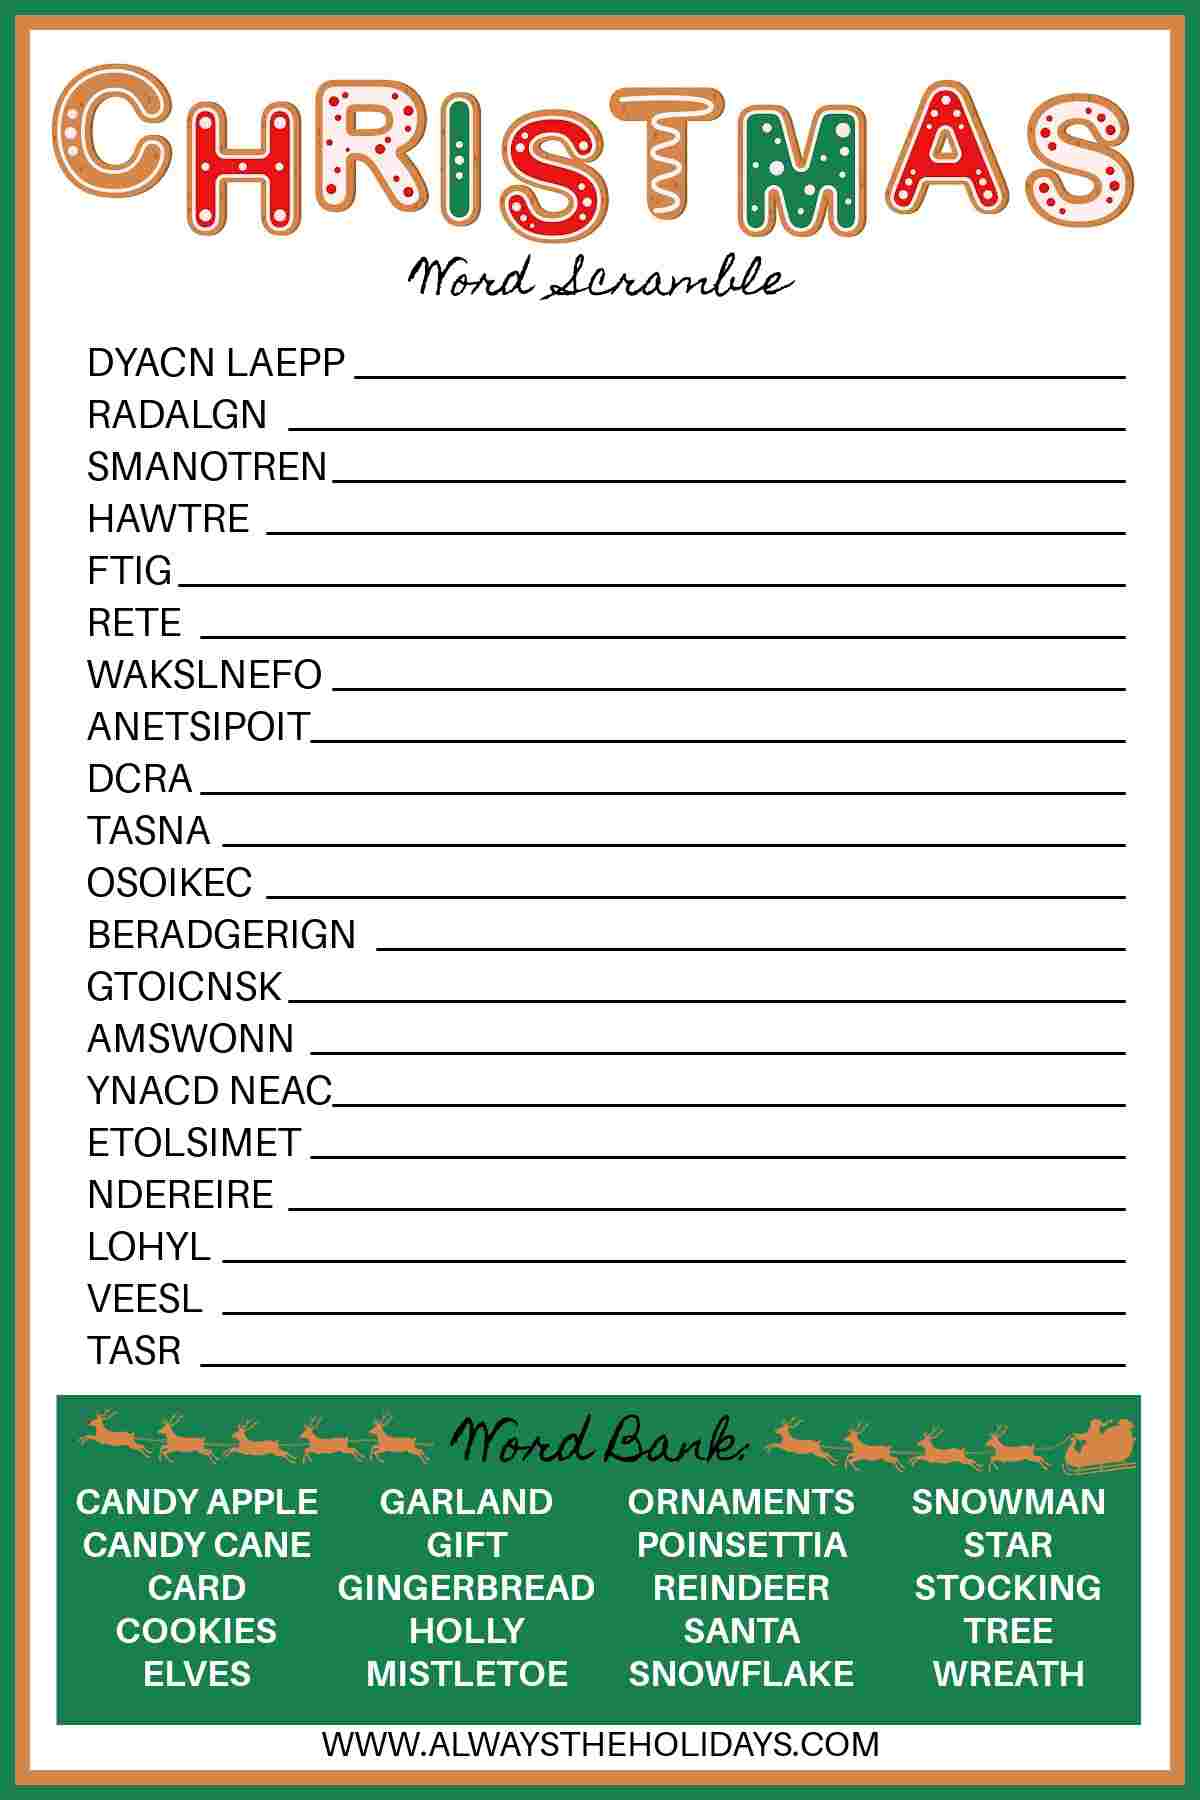 A free Christmas word scramble printable with a word bank at the bottom and the word "Christmas" at the top in brown, green and red gingerbread lettering.